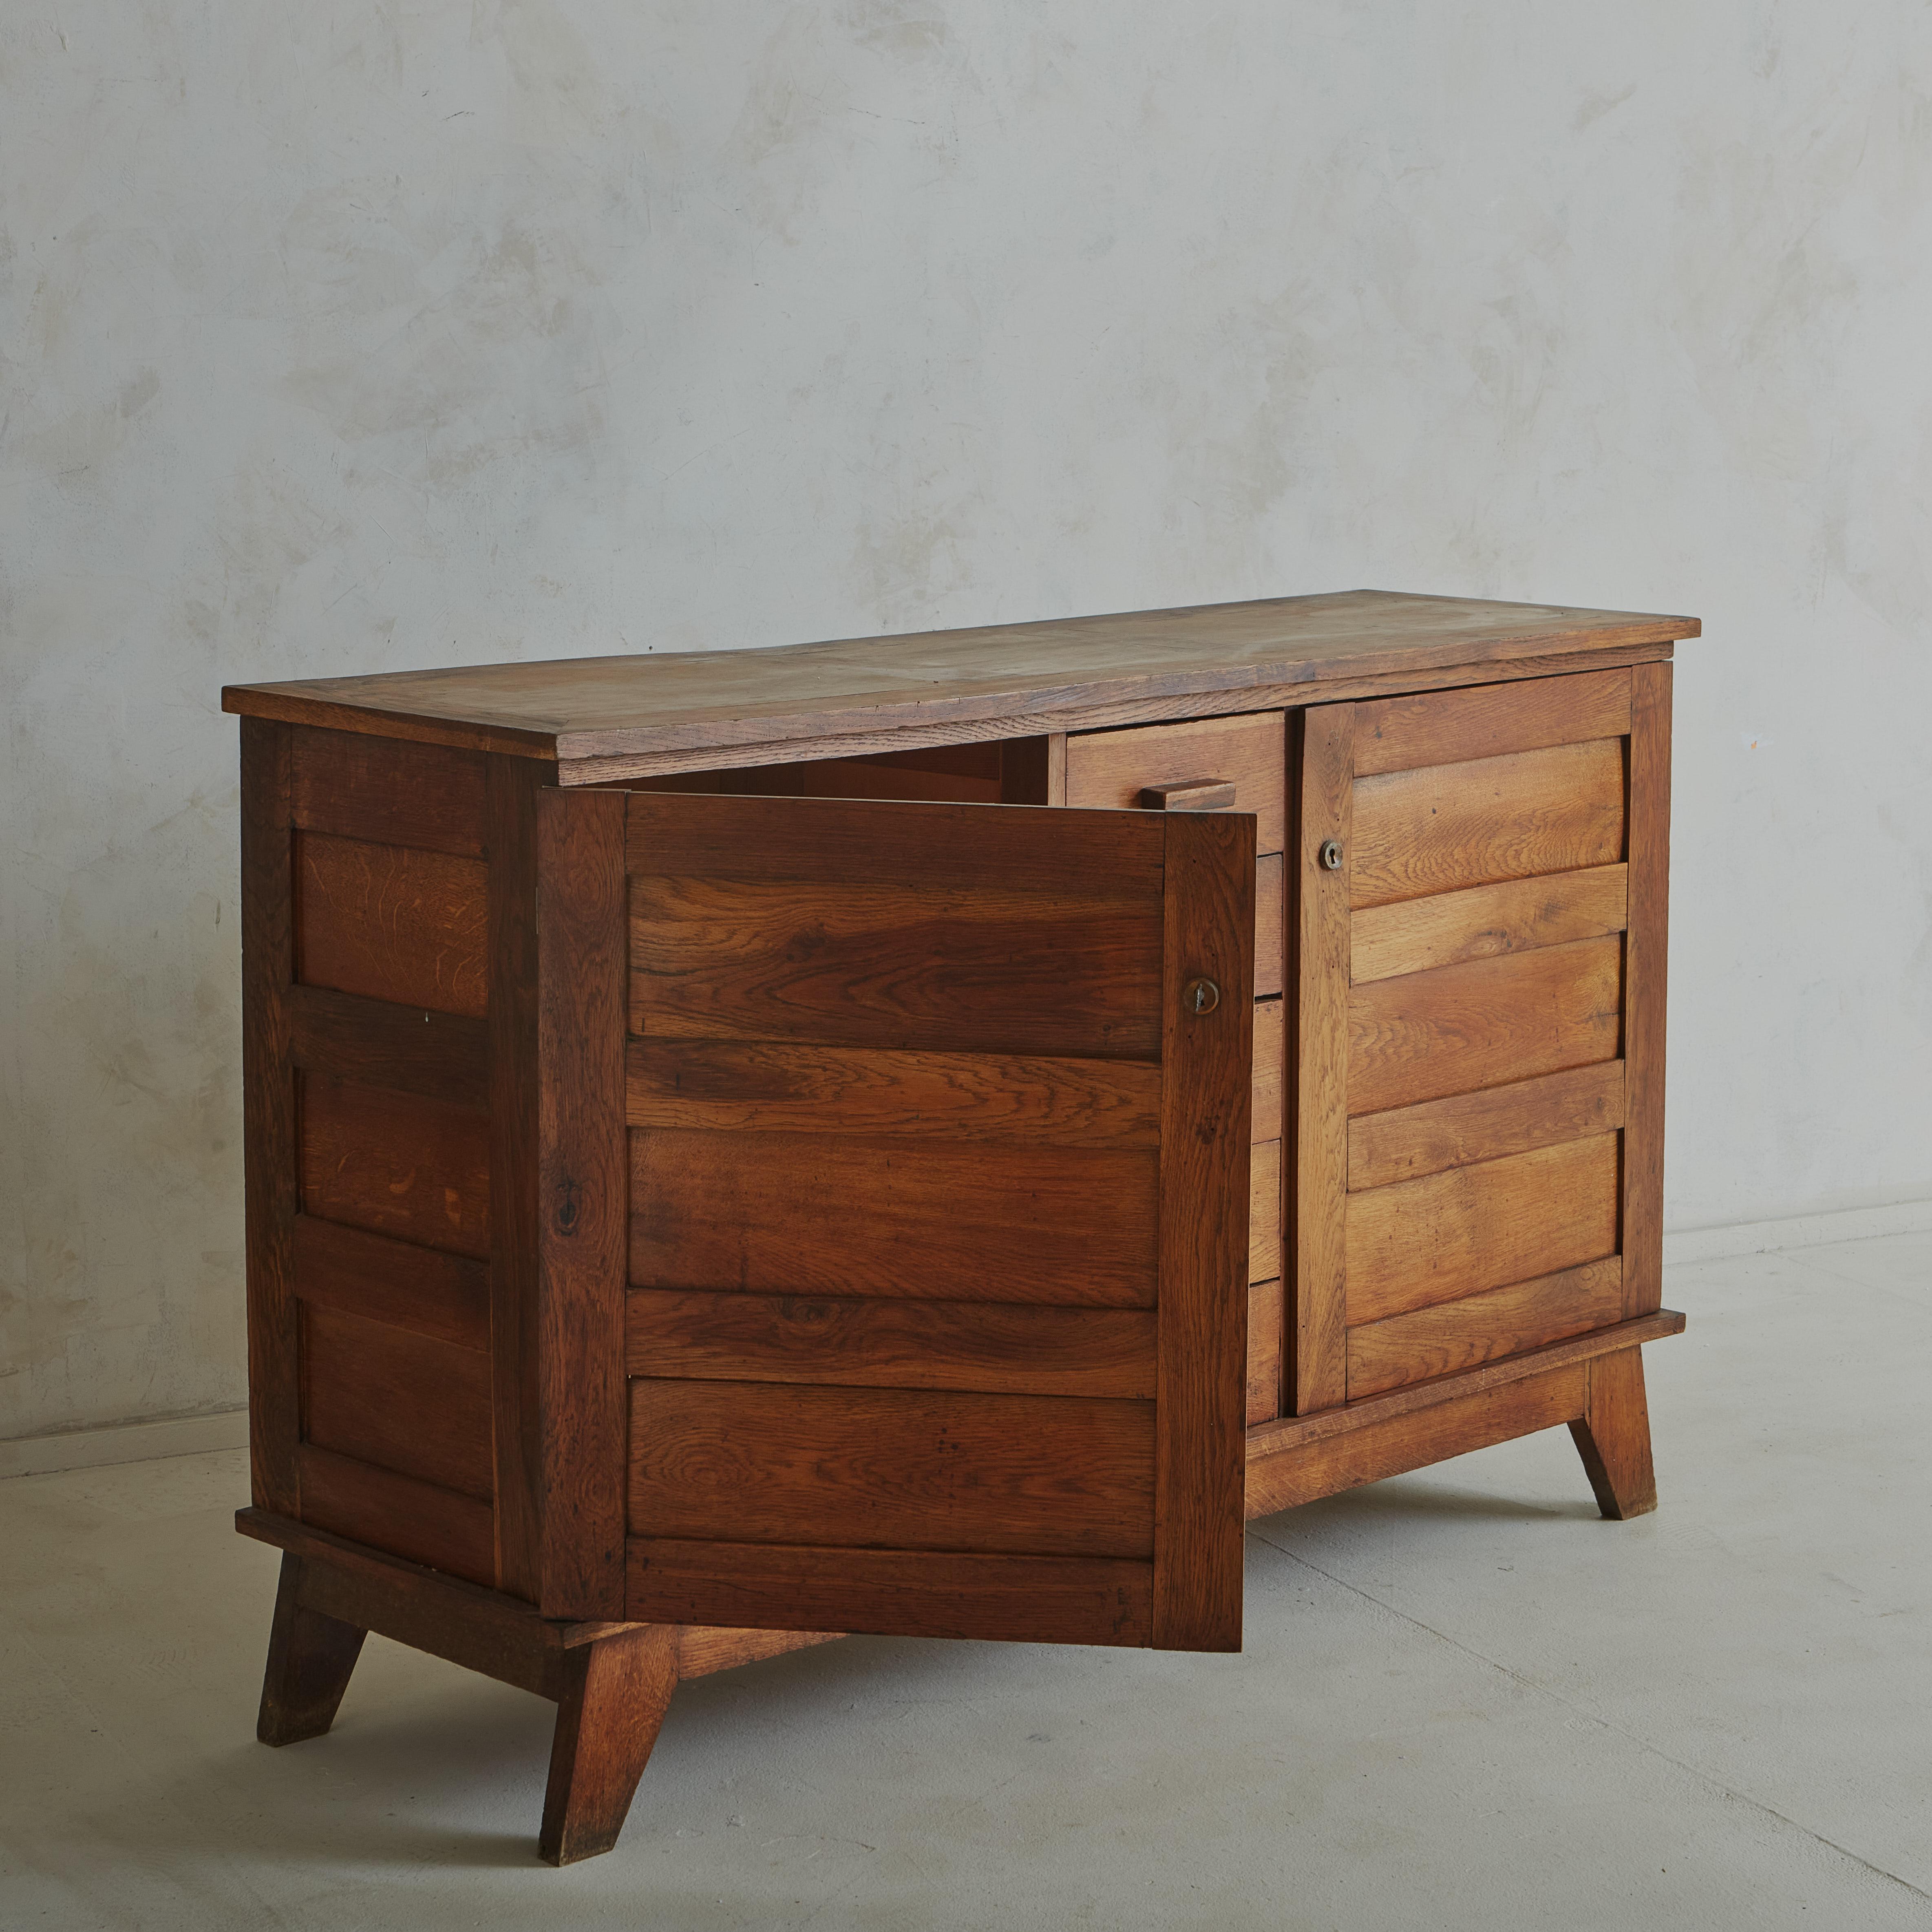 Magnificent oak sideboard by René Gabriel, designed between 1945 and 1950 during the postwar reconstruction period. Featuring two doors and five drawers with an original key and compass legs. The chest is in great condition. The original patina is